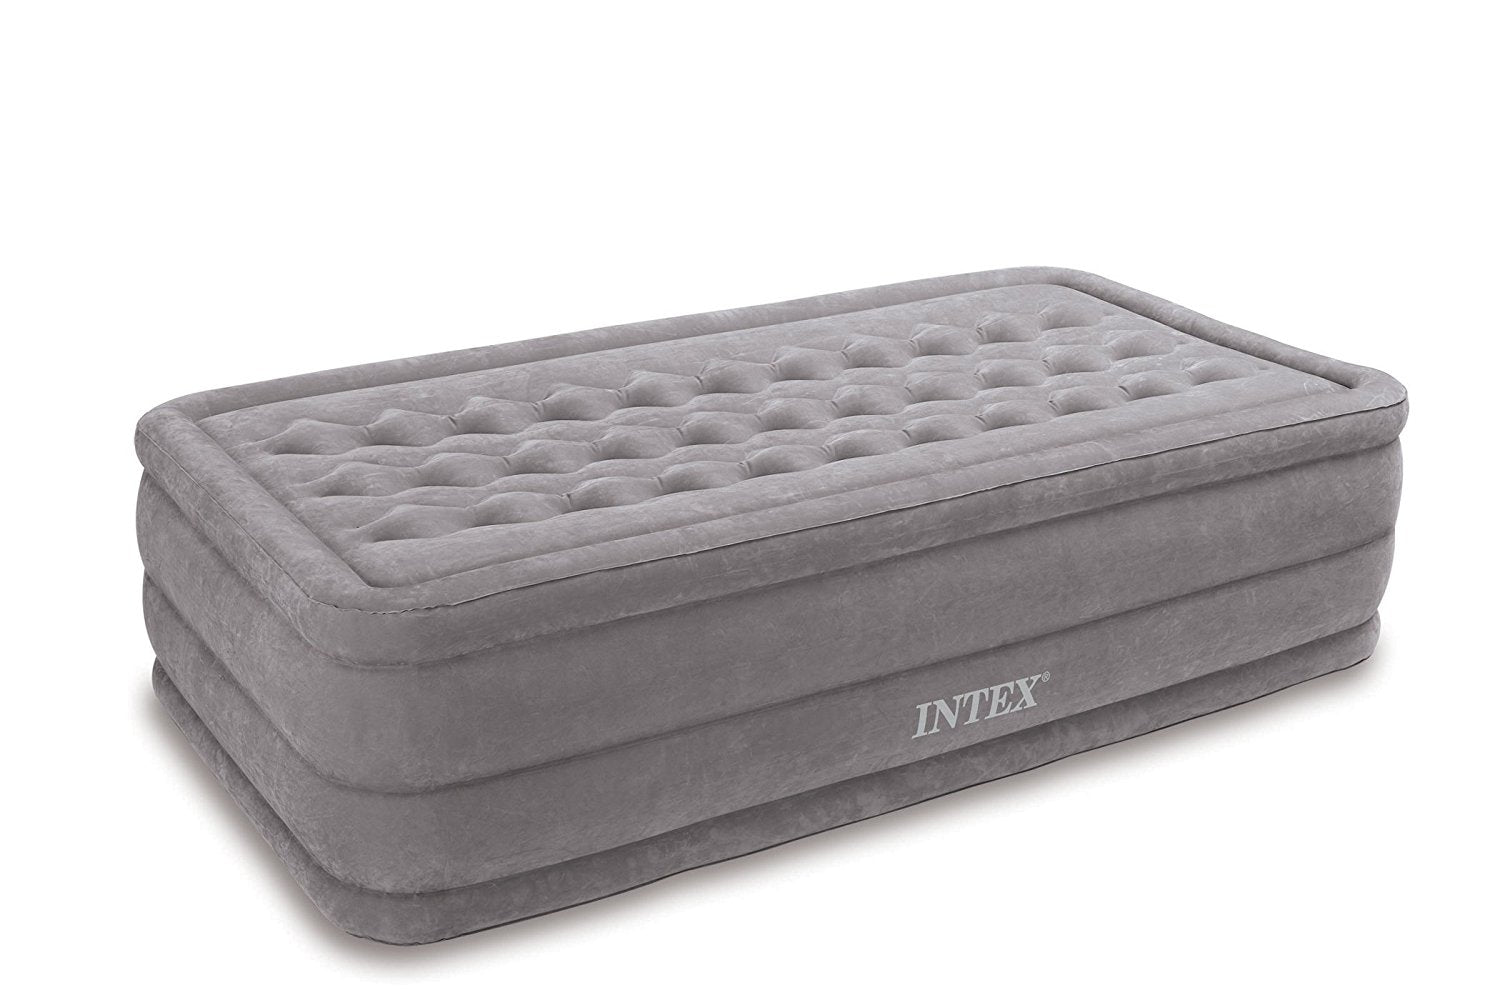 Intex Ultra Plush Airbed with Built-in Electric Pump, Twin, Bed Height 18"